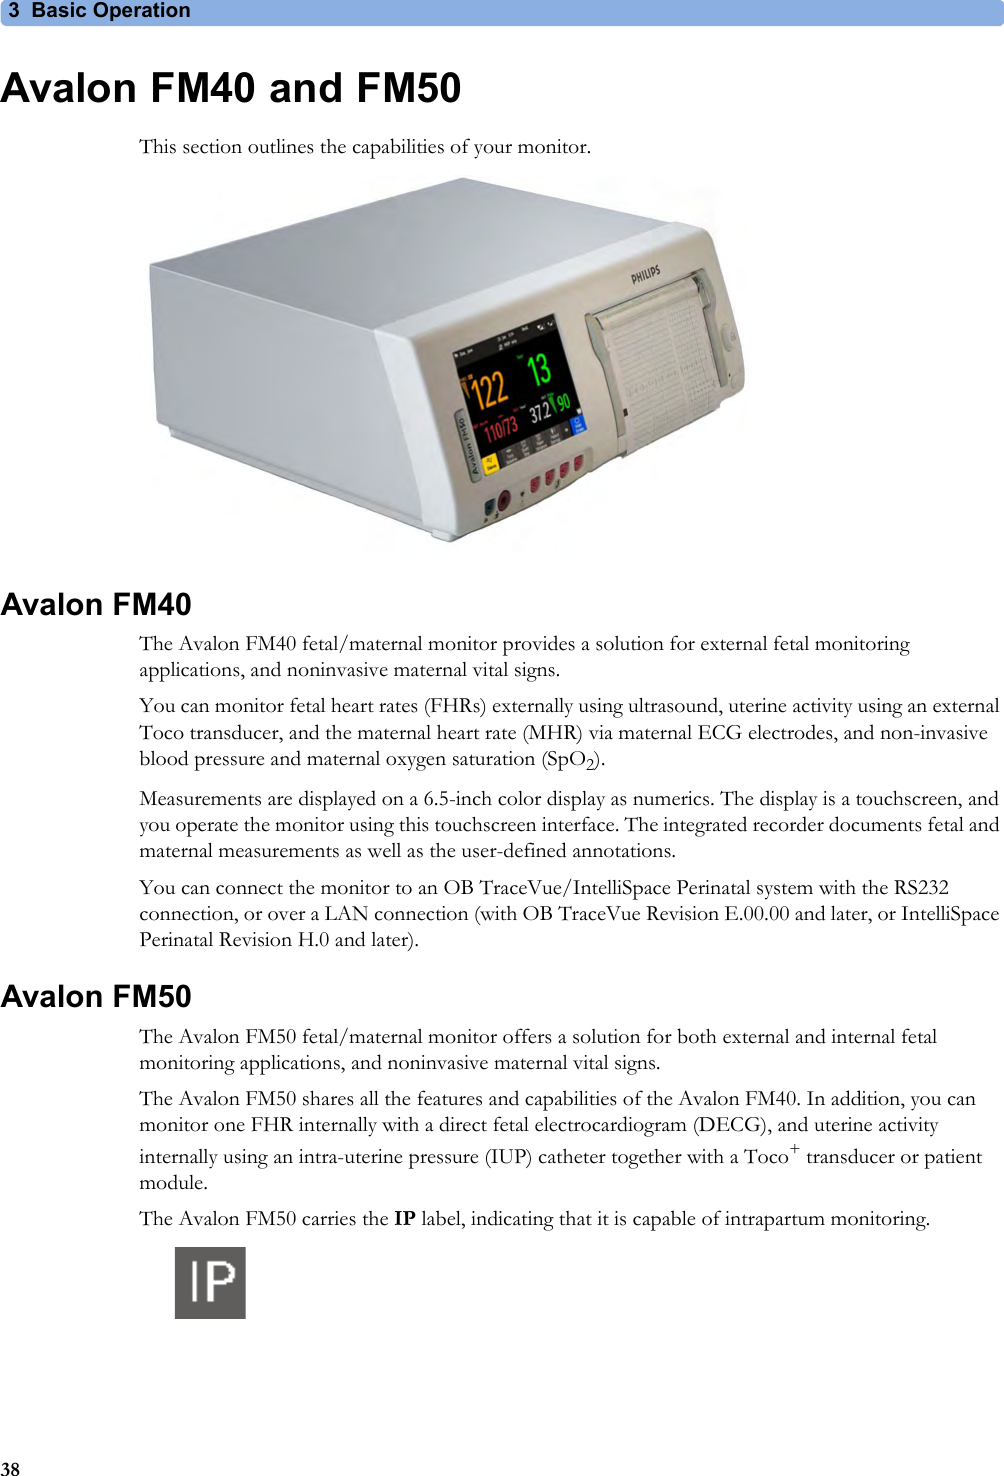 3 Basic Operation38Avalon FM40 and FM50This section outlines the capabilities of your monitor.Avalon FM40The Avalon FM40 fetal/maternal monitor provides a solution for external fetal monitoring applications, and noninvasive maternal vital signs.You can monitor fetal heart rates (FHRs) externally using ultrasound, uterine activity using an external Toco transducer, and the maternal heart rate (MHR) via maternal ECG electrodes, and non-invasive blood pressure and maternal oxygen saturation (SpO2).Measurements are displayed on a 6.5-inch color display as numerics. The display is a touchscreen, and you operate the monitor using this touchscreen interface. The integrated recorder documents fetal and maternal measurements as well as the user-defined annotations.You can connect the monitor to an OB TraceVue/IntelliSpace Perinatal system with the RS232 connection, or over a LAN connection (with OB TraceVue Revision E.00.00 and later, or IntelliSpace Perinatal Revision H.0 and later).Avalon FM50The Avalon FM50 fetal/maternal monitor offers a solution for both external and internal fetal monitoring applications, and noninvasive maternal vital signs.The Avalon FM50 shares all the features and capabilities of the Avalon FM40. In addition, you can monitor one FHR internally with a direct fetal electrocardiogram (DECG), and uterine activity internally using an intra-uterine pressure (IUP) catheter together with a Toco+ transducer or patient module.The Avalon FM50 carries the IP label, indicating that it is capable of intrapartum monitoring.